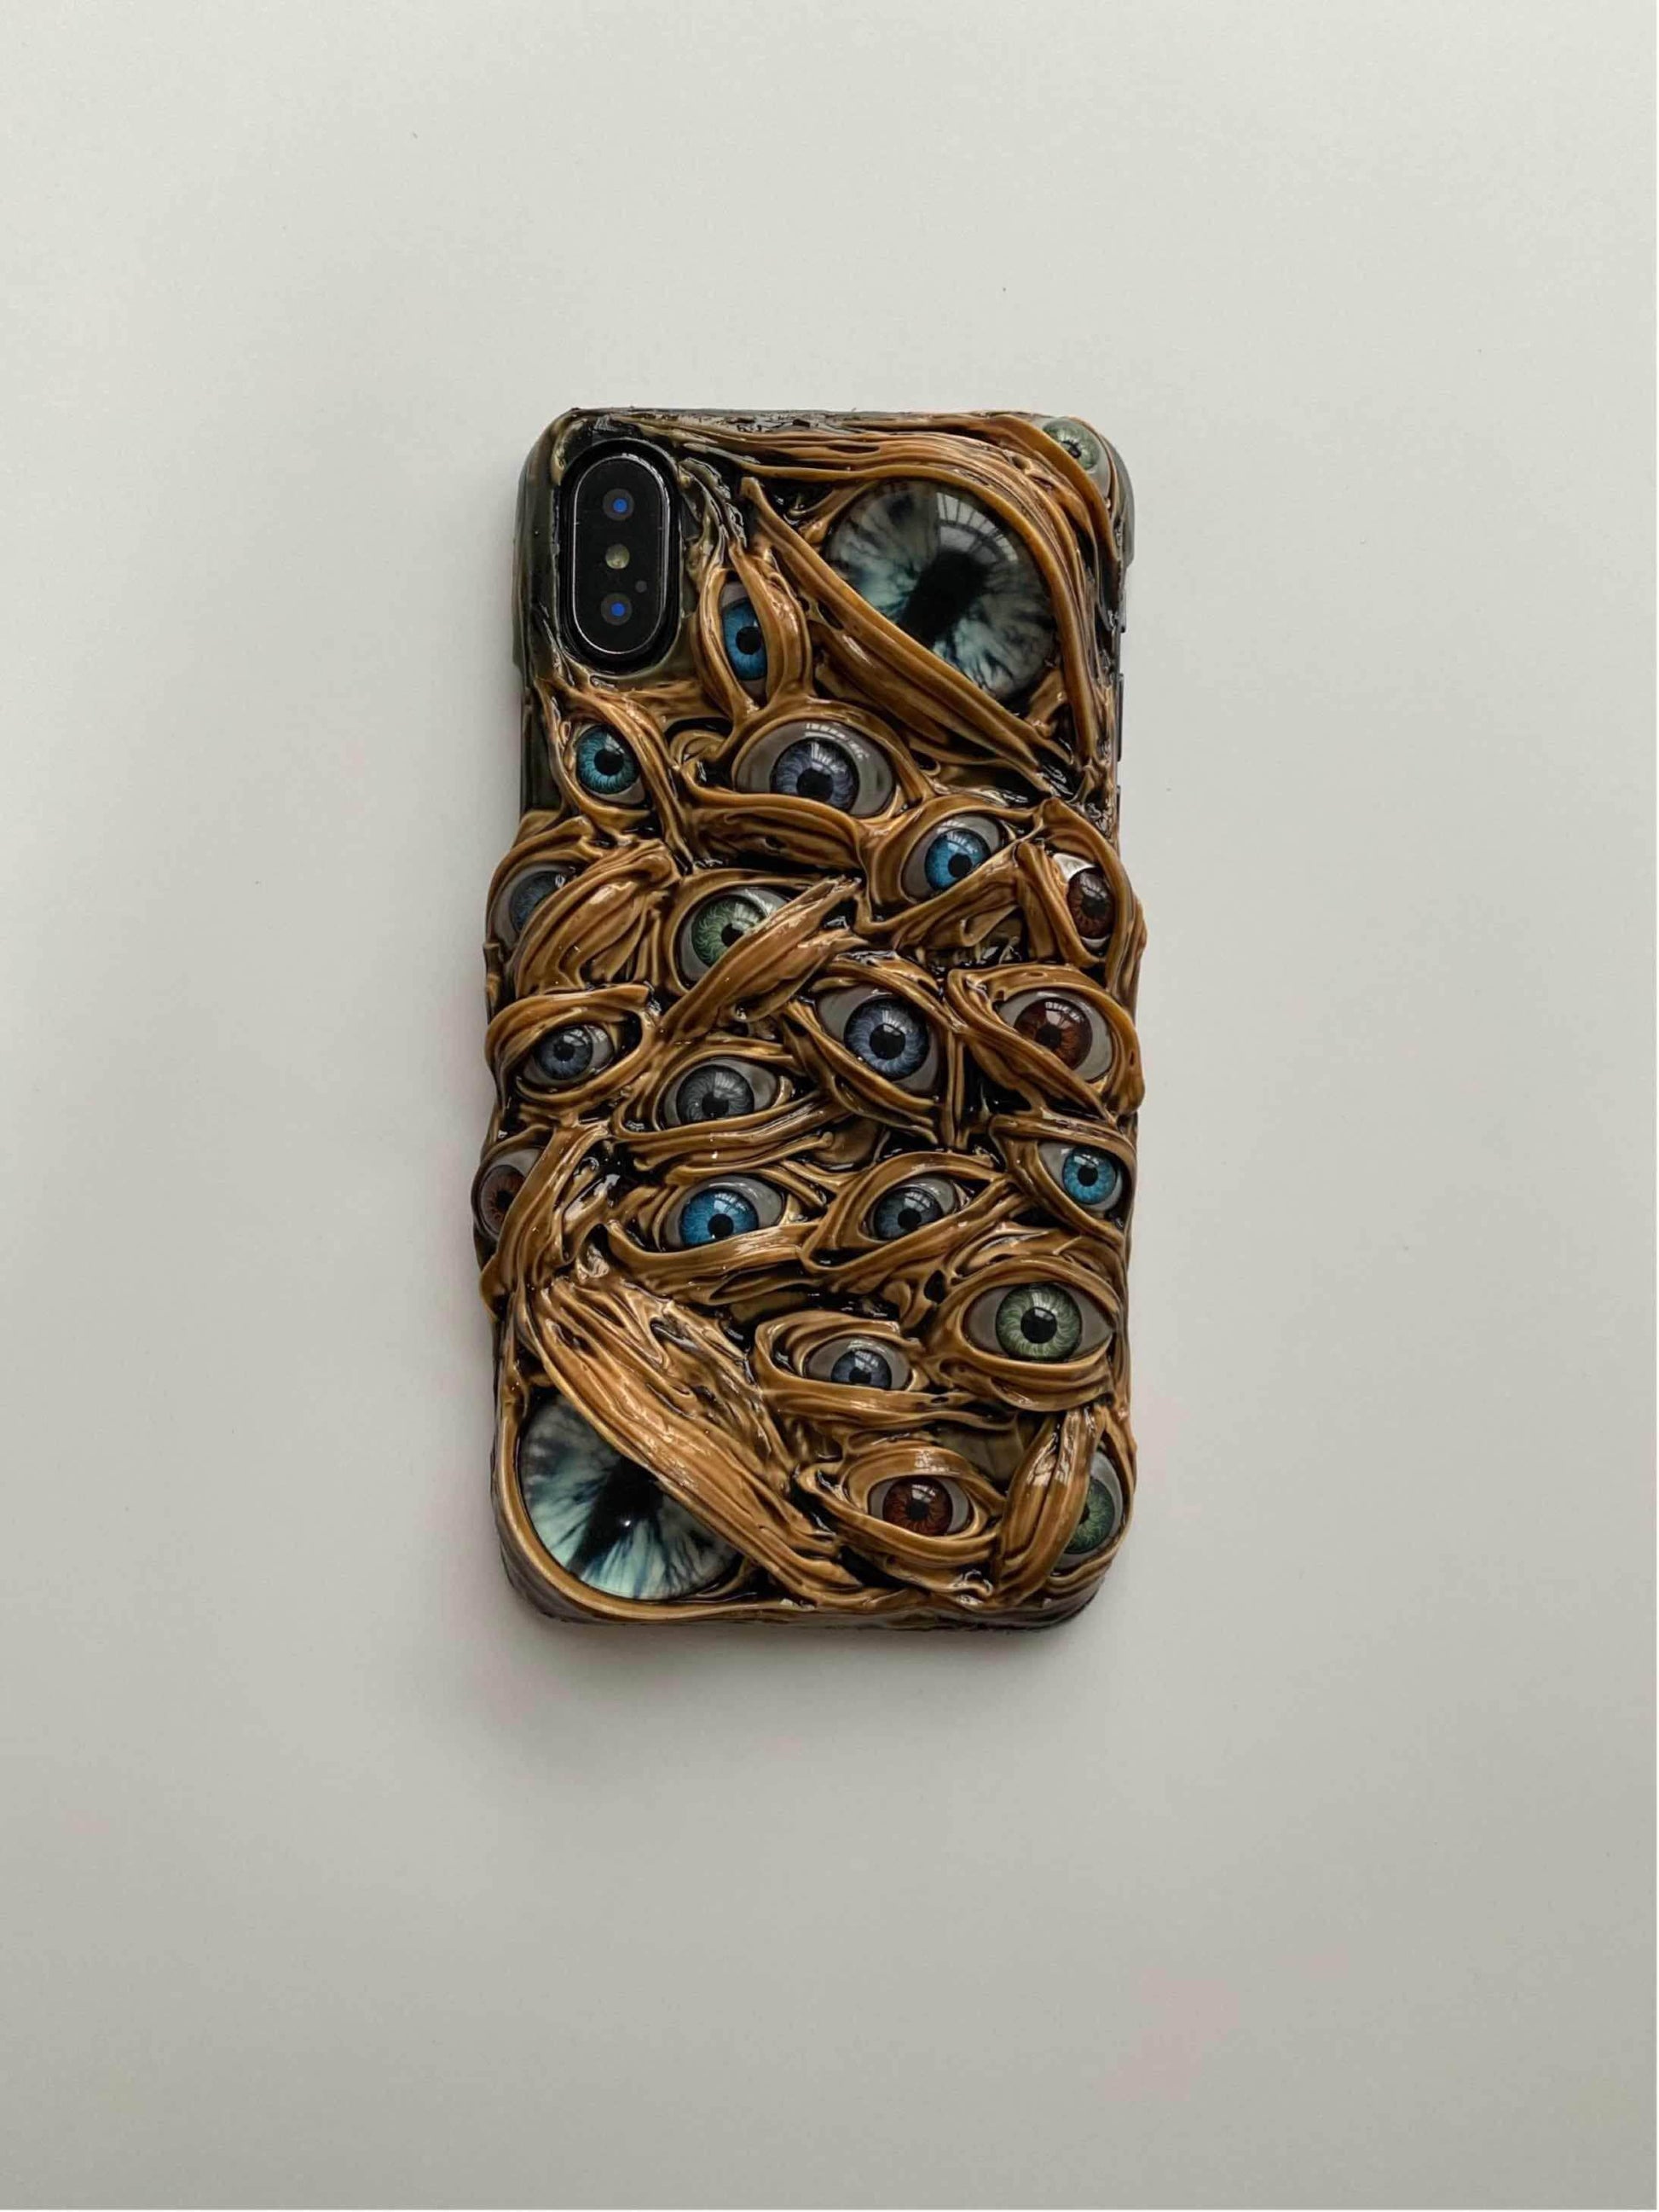 The Monster Eyes Handmade Designer iPhone Case For iPhone SE 11 Pro Max X XS Max XR 7 8 Plus - techypopcom